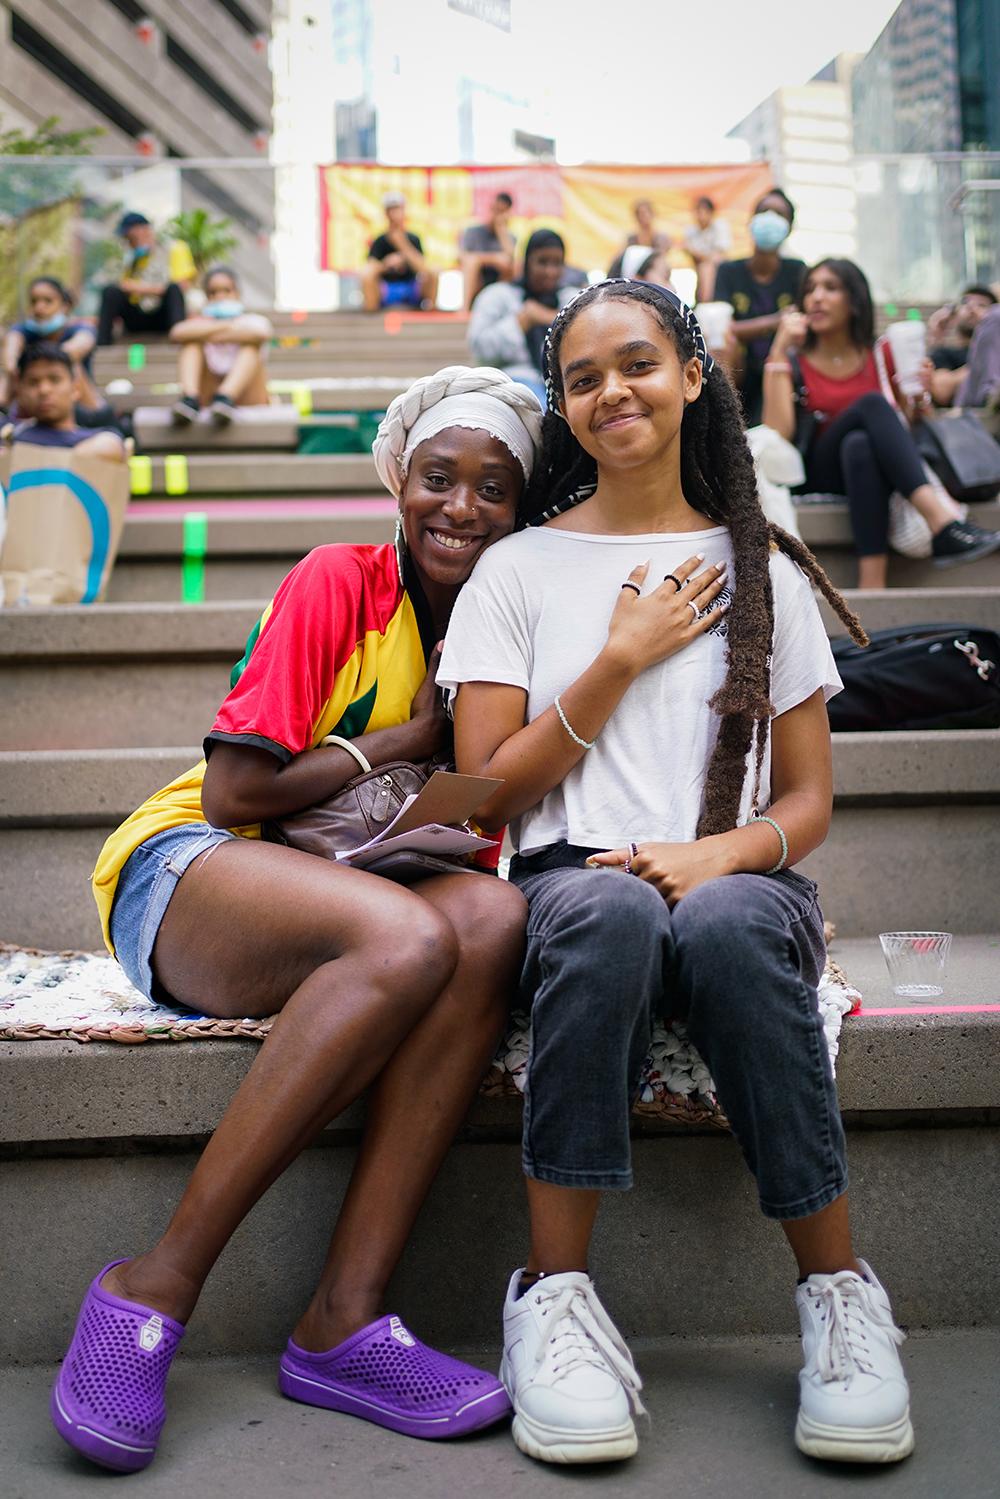 A young Black girl and an older Black woman pose together on steps. They snuggle and hold their hands to their chests.